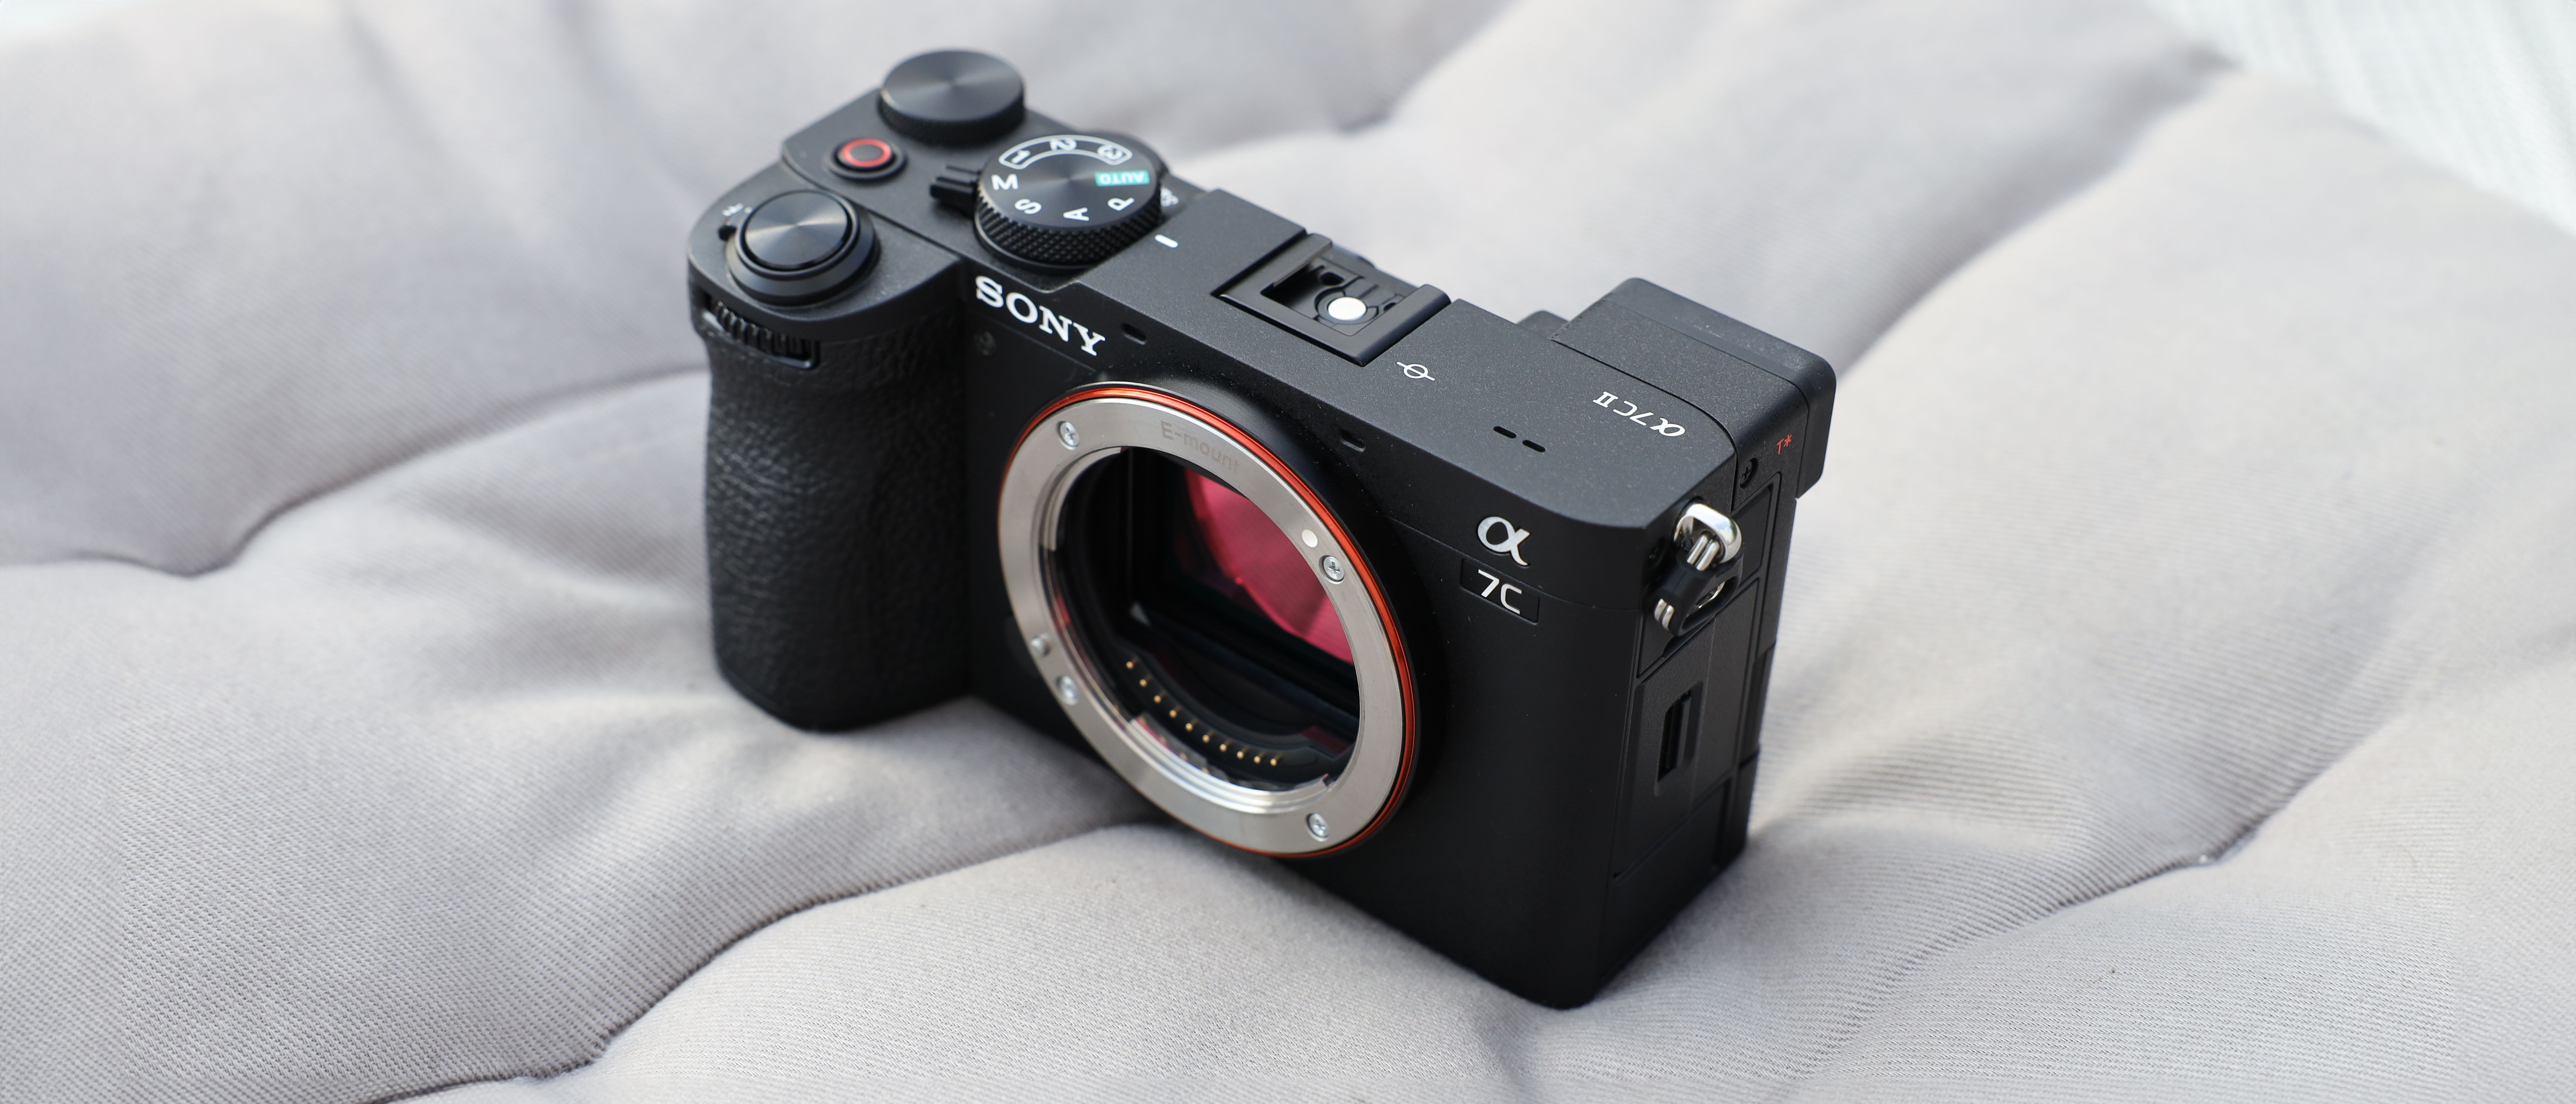 Sony A7C II review: Minor updates on the outside, big improvements